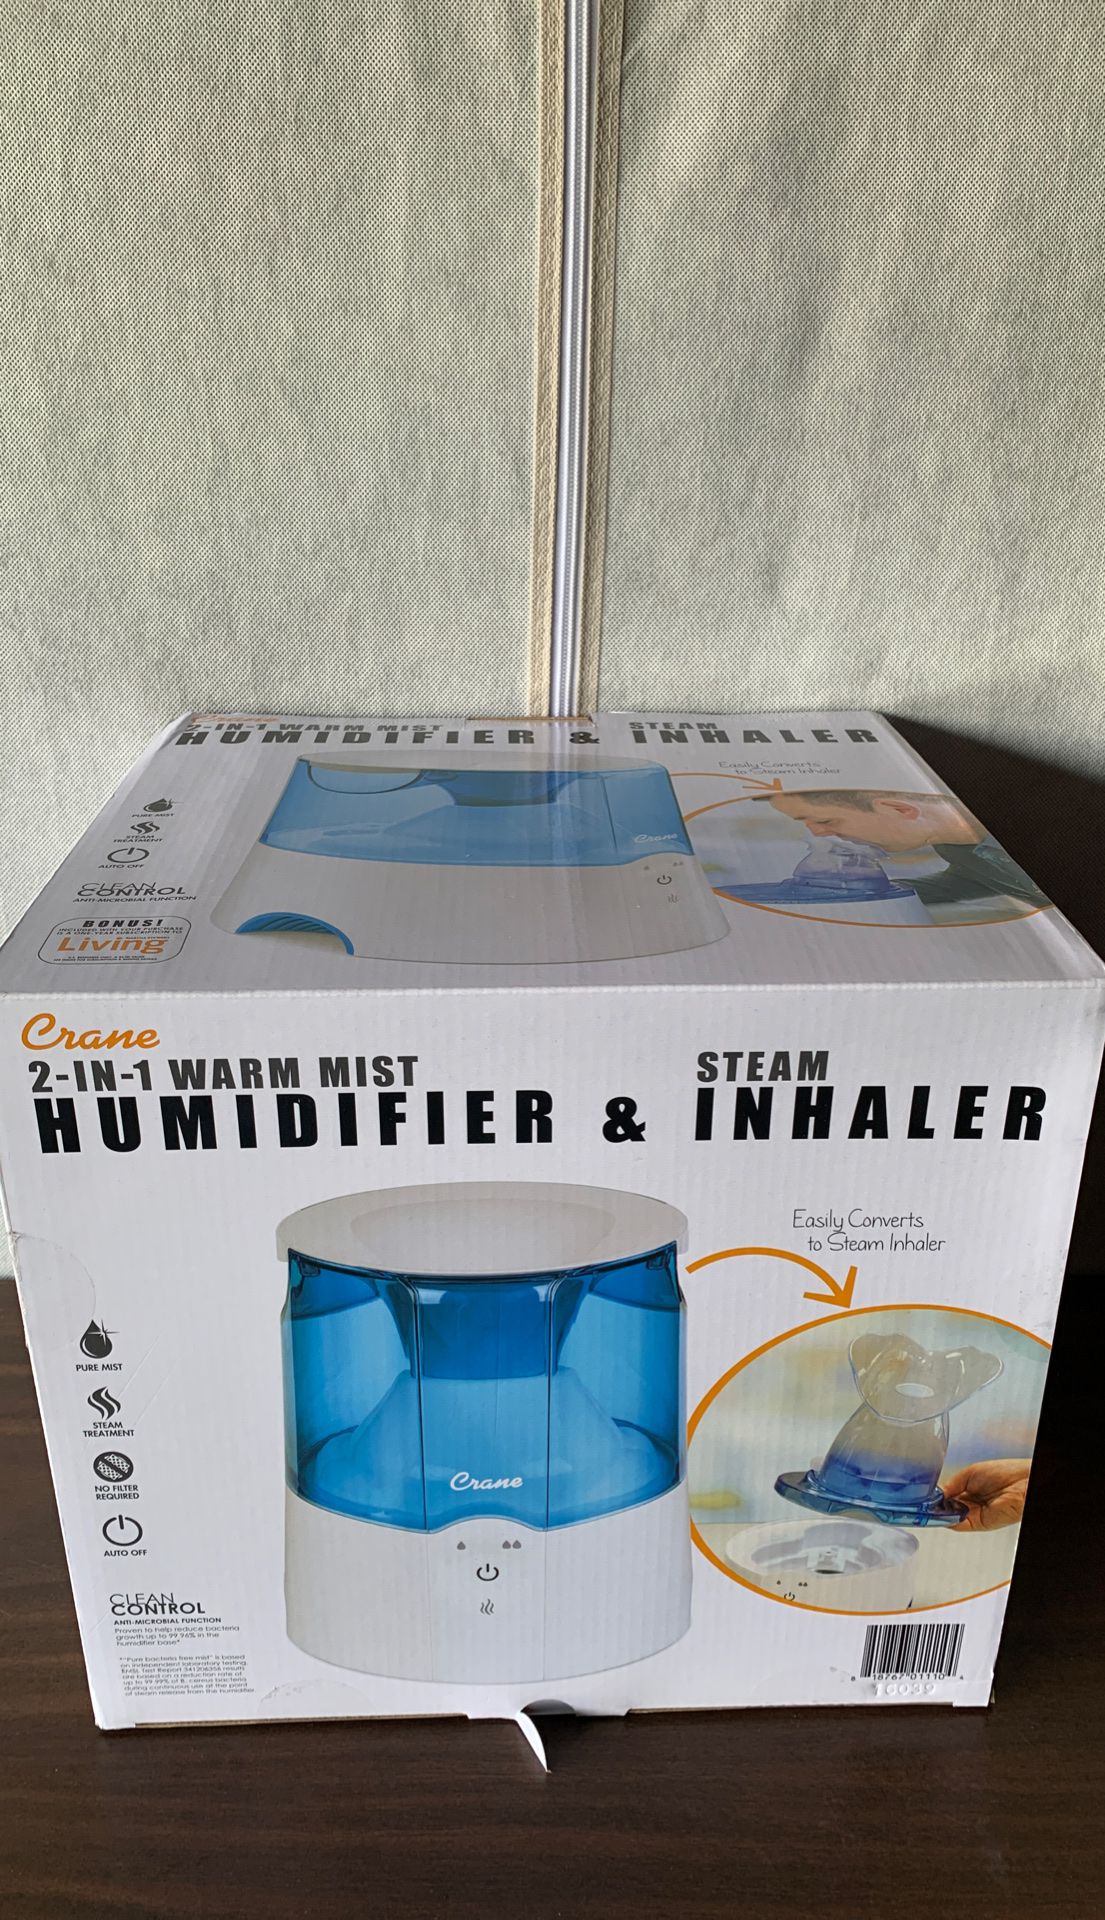 New Crane humidifier and inhaler